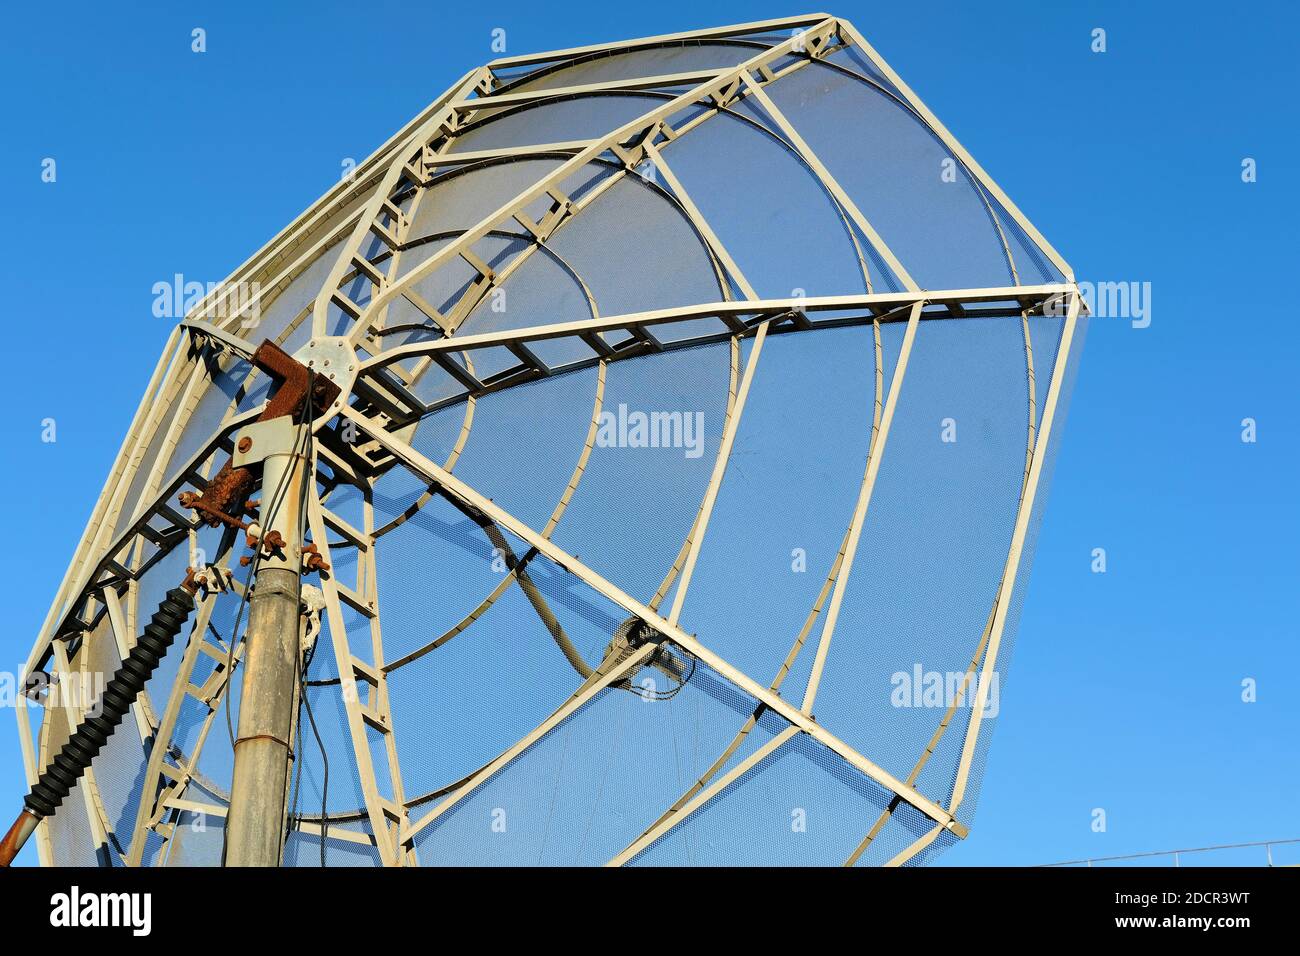 Mesh satellite dish and antenna for television reception Stock Photo - Alamy